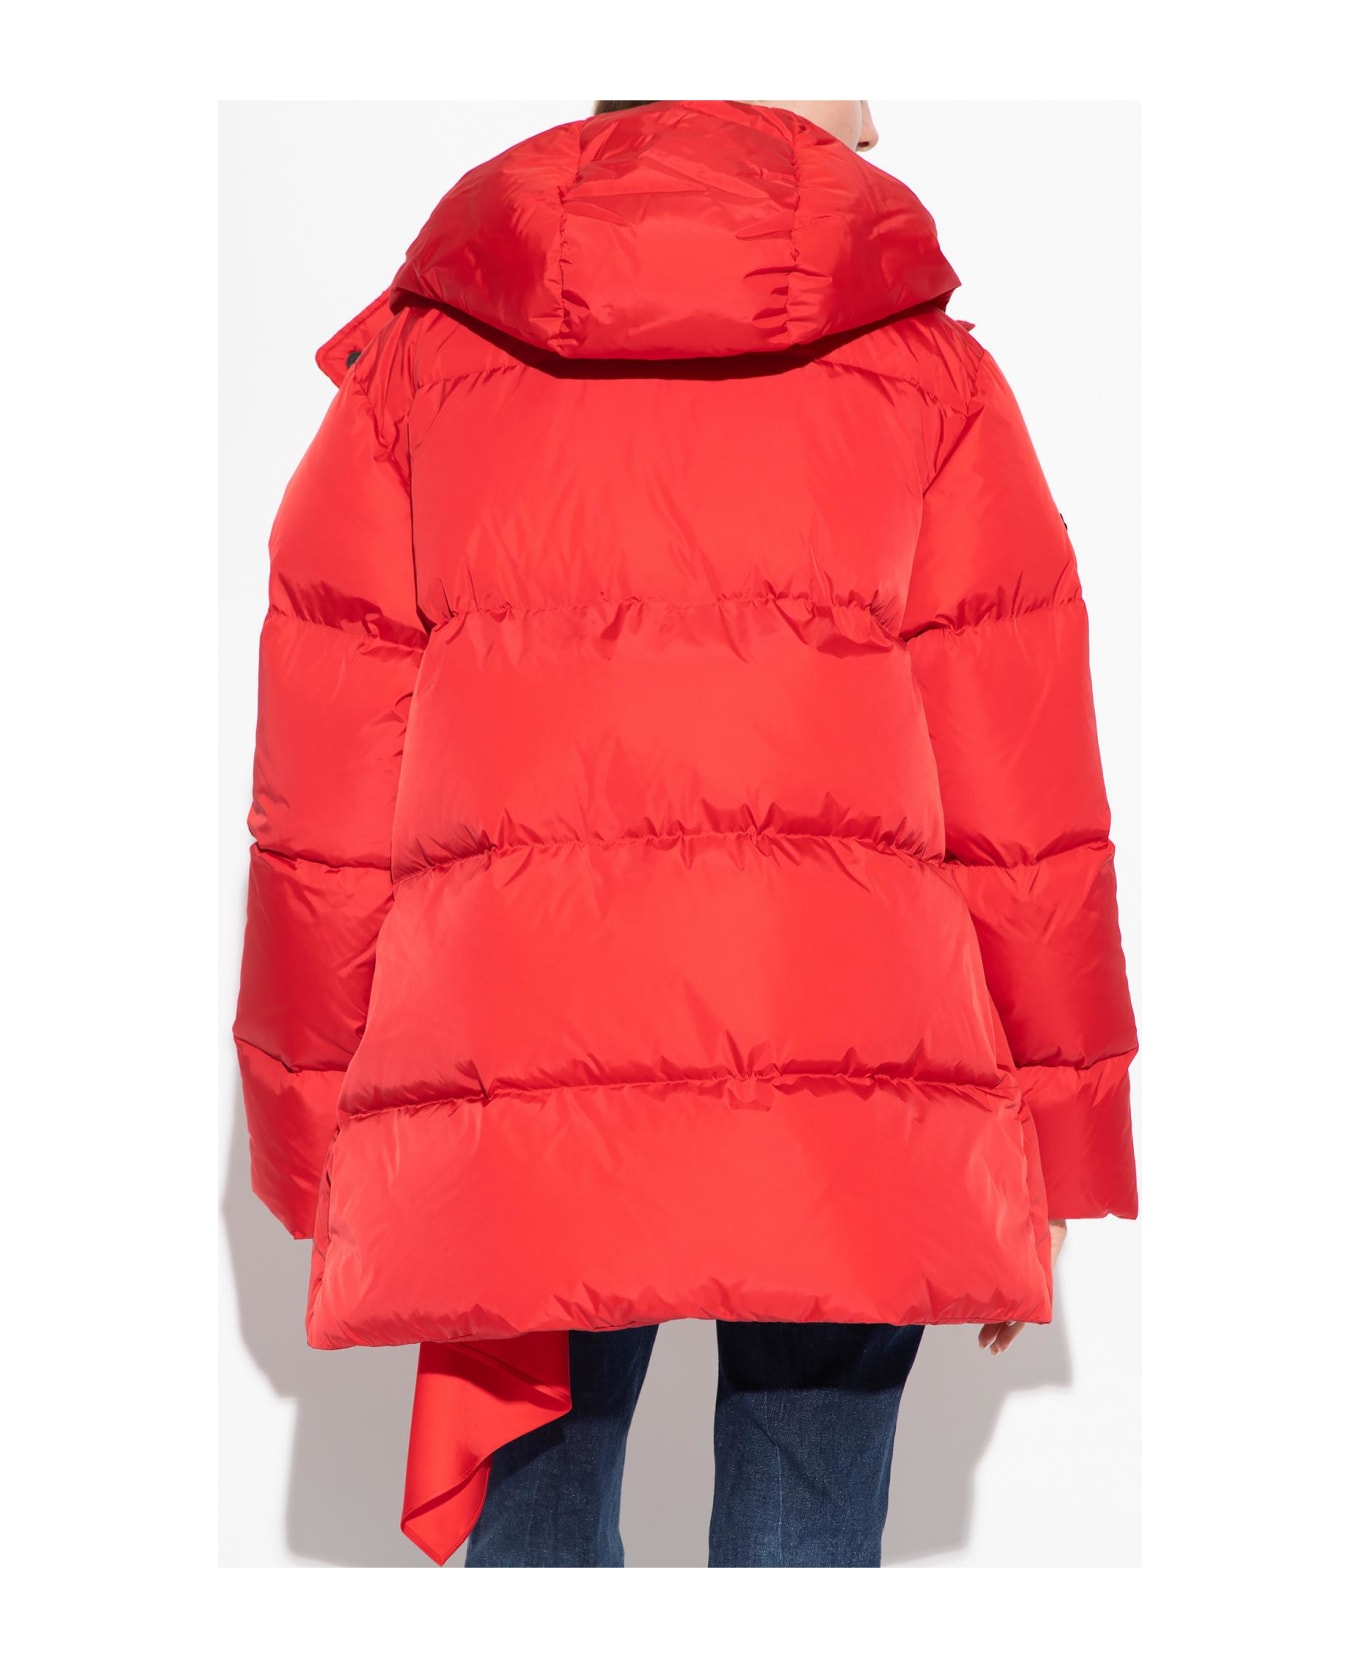 Dsquared2 Hooded Down Jacket - Rosso